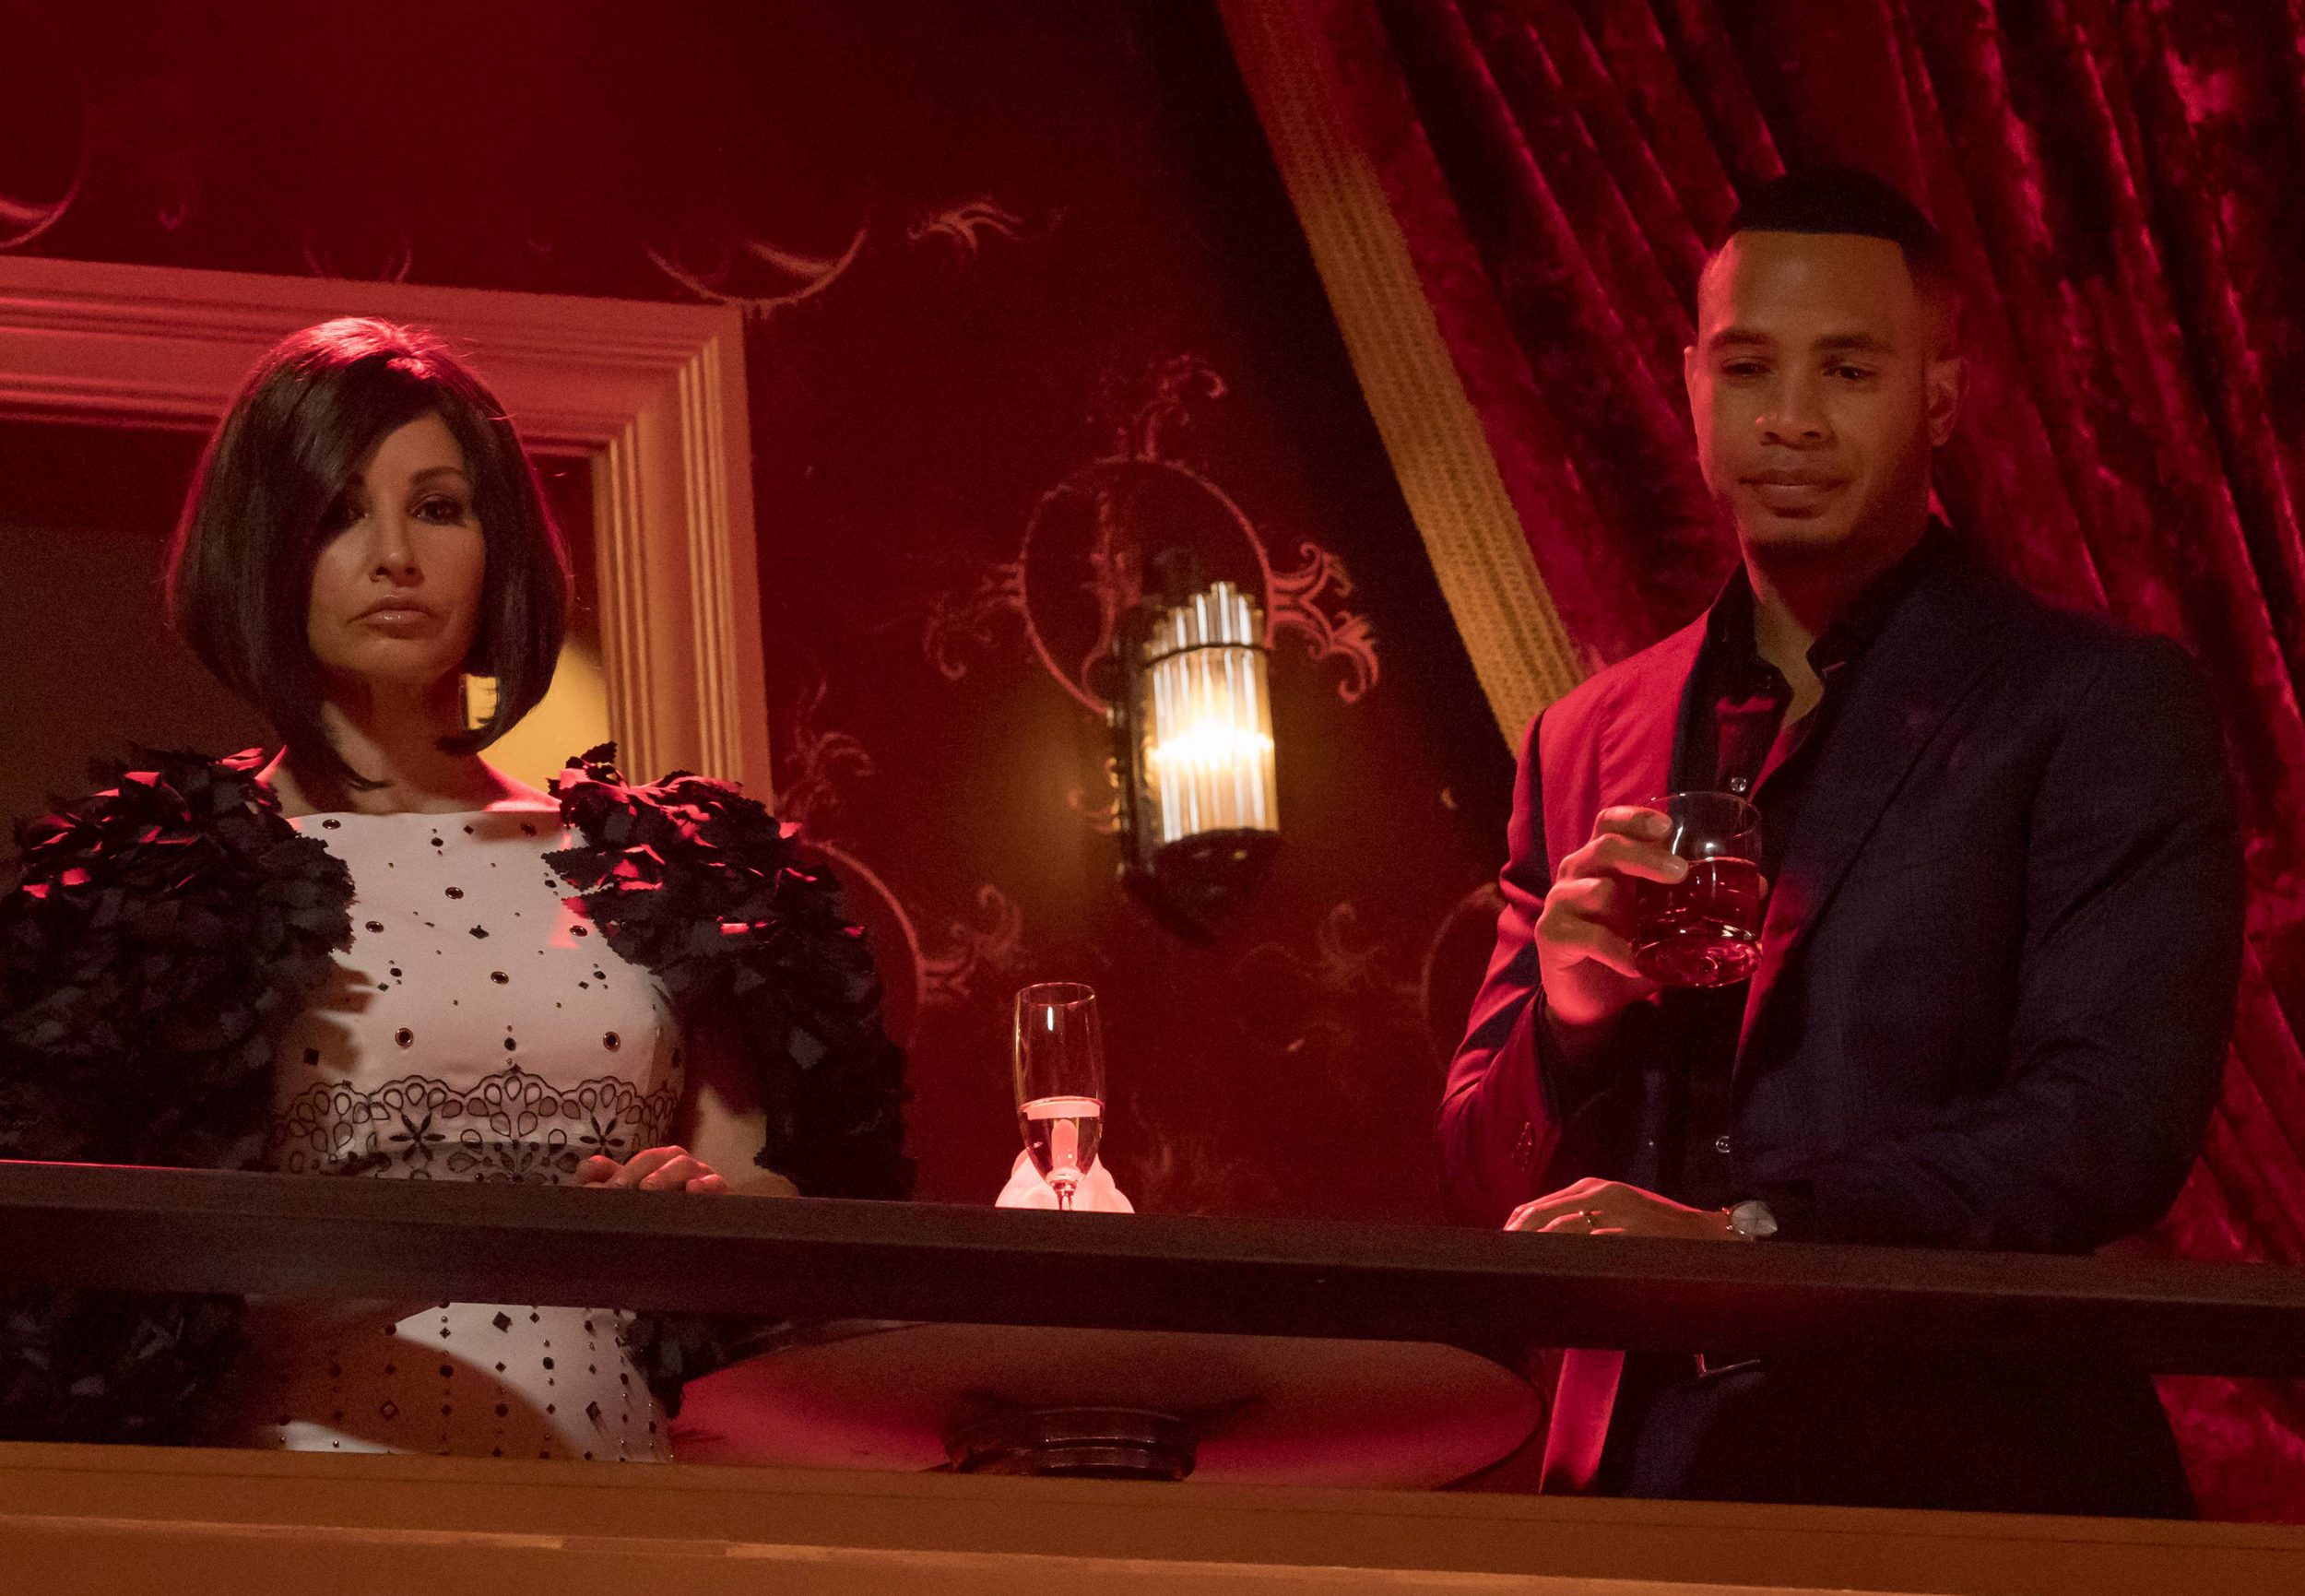 EMPIRE:  Pictured L-R: Guest star Gina Gershon and Trai Byers in the "The Unkindest Cut" episode of EMPIRE airing Dec. 7 (9:00-10:00 PM ET/PT) on FOX. ©2016 Fox Broadcasting Co. CR: Chuck Hodes/FOX